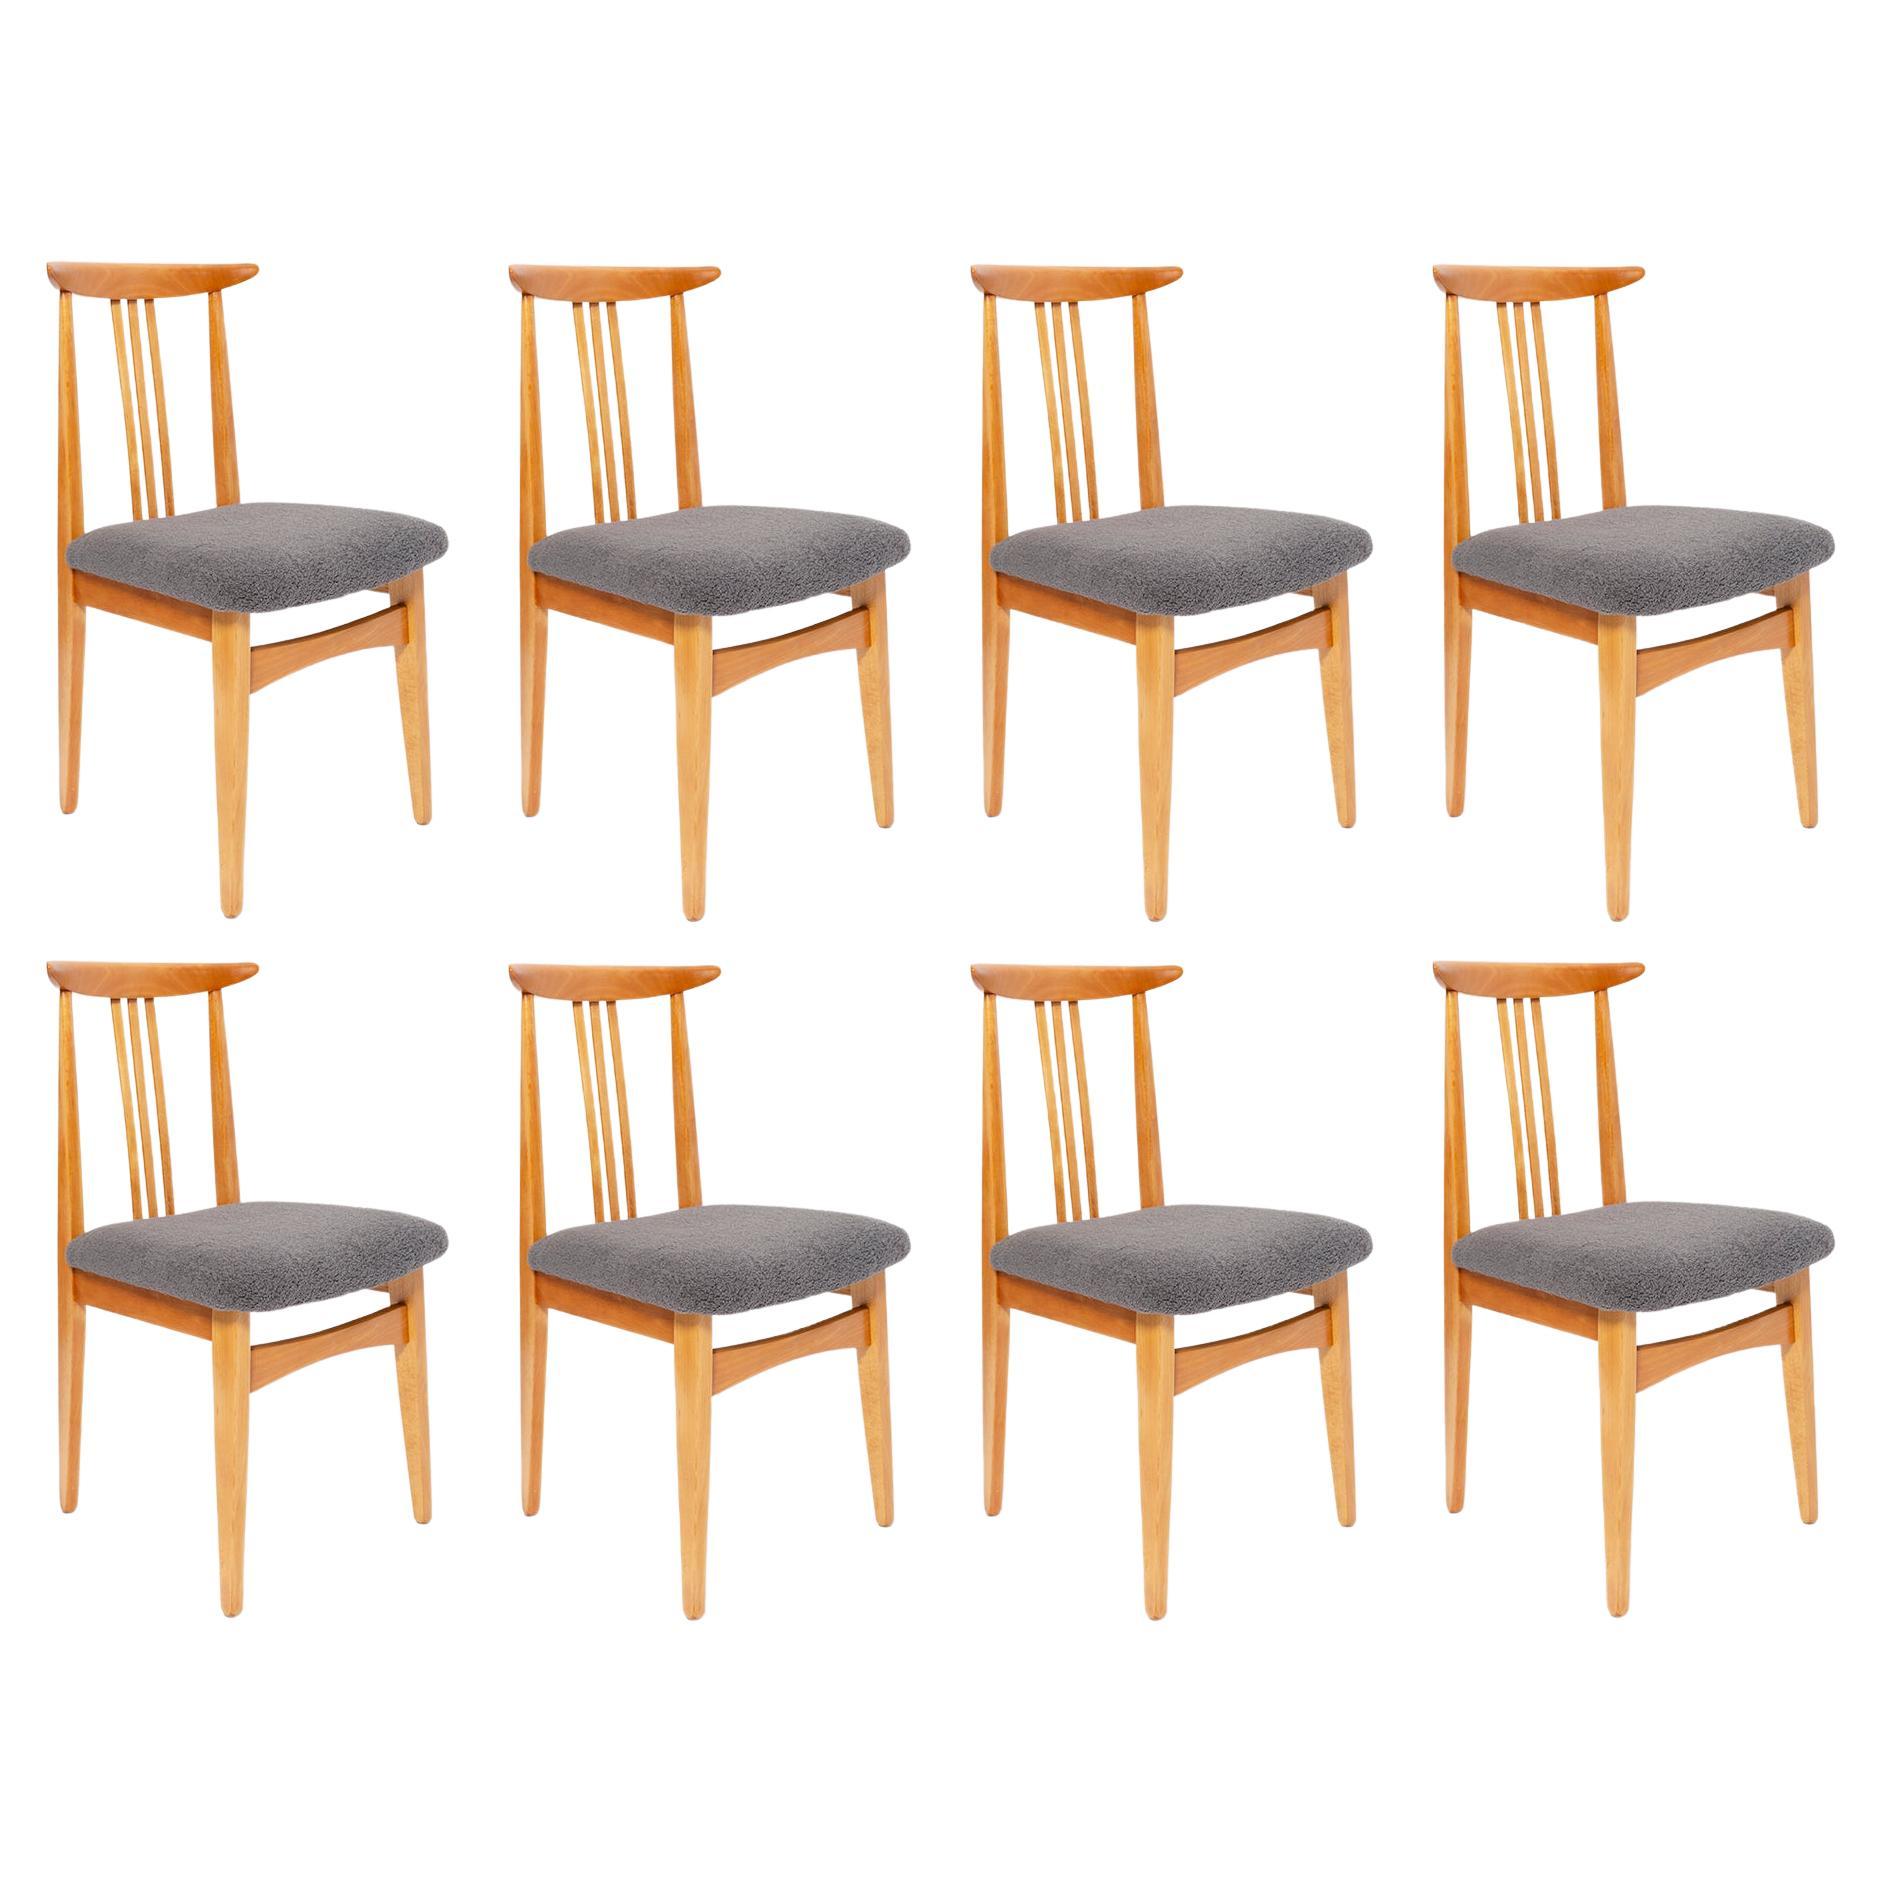 Eight Mid-Century Graphite Boucle Chairs, Light Wood, M Zielinski, Europe, 1960 For Sale